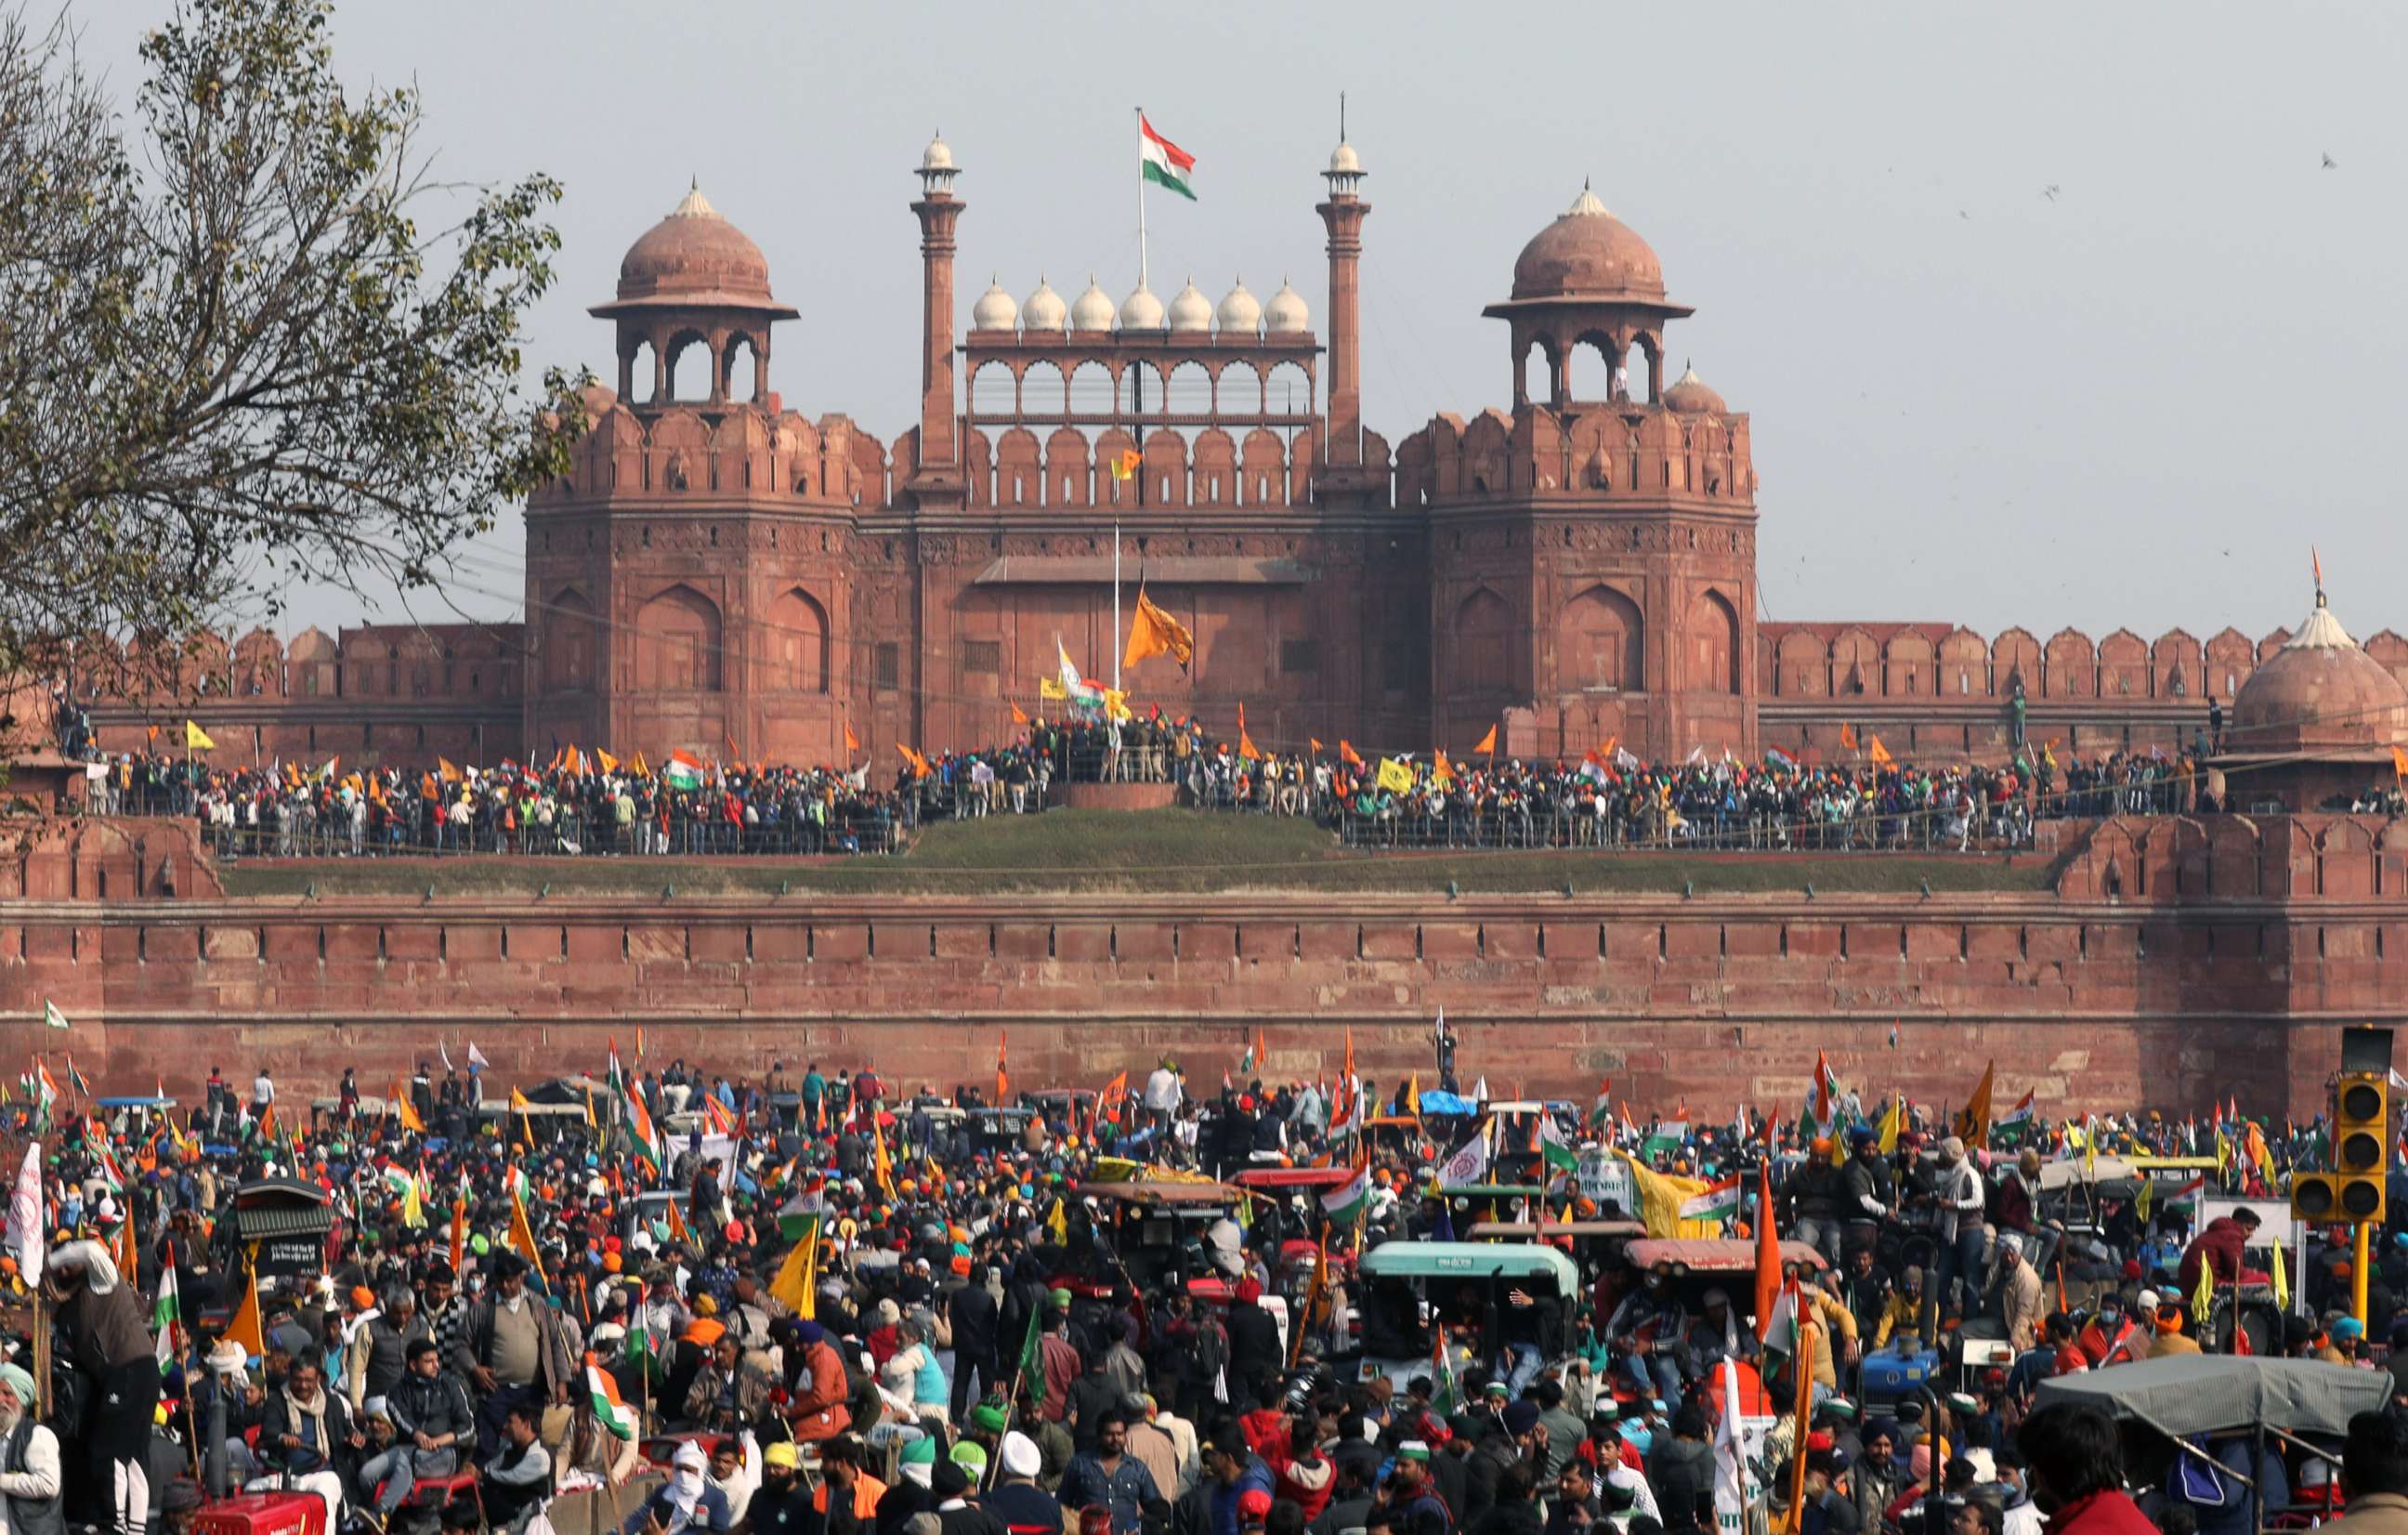 PHOTO: Indian Farmers gather at the Red Fort amid their ongoing protest against the new agriculture laws in New Delhi, Jan. 26, 2021.